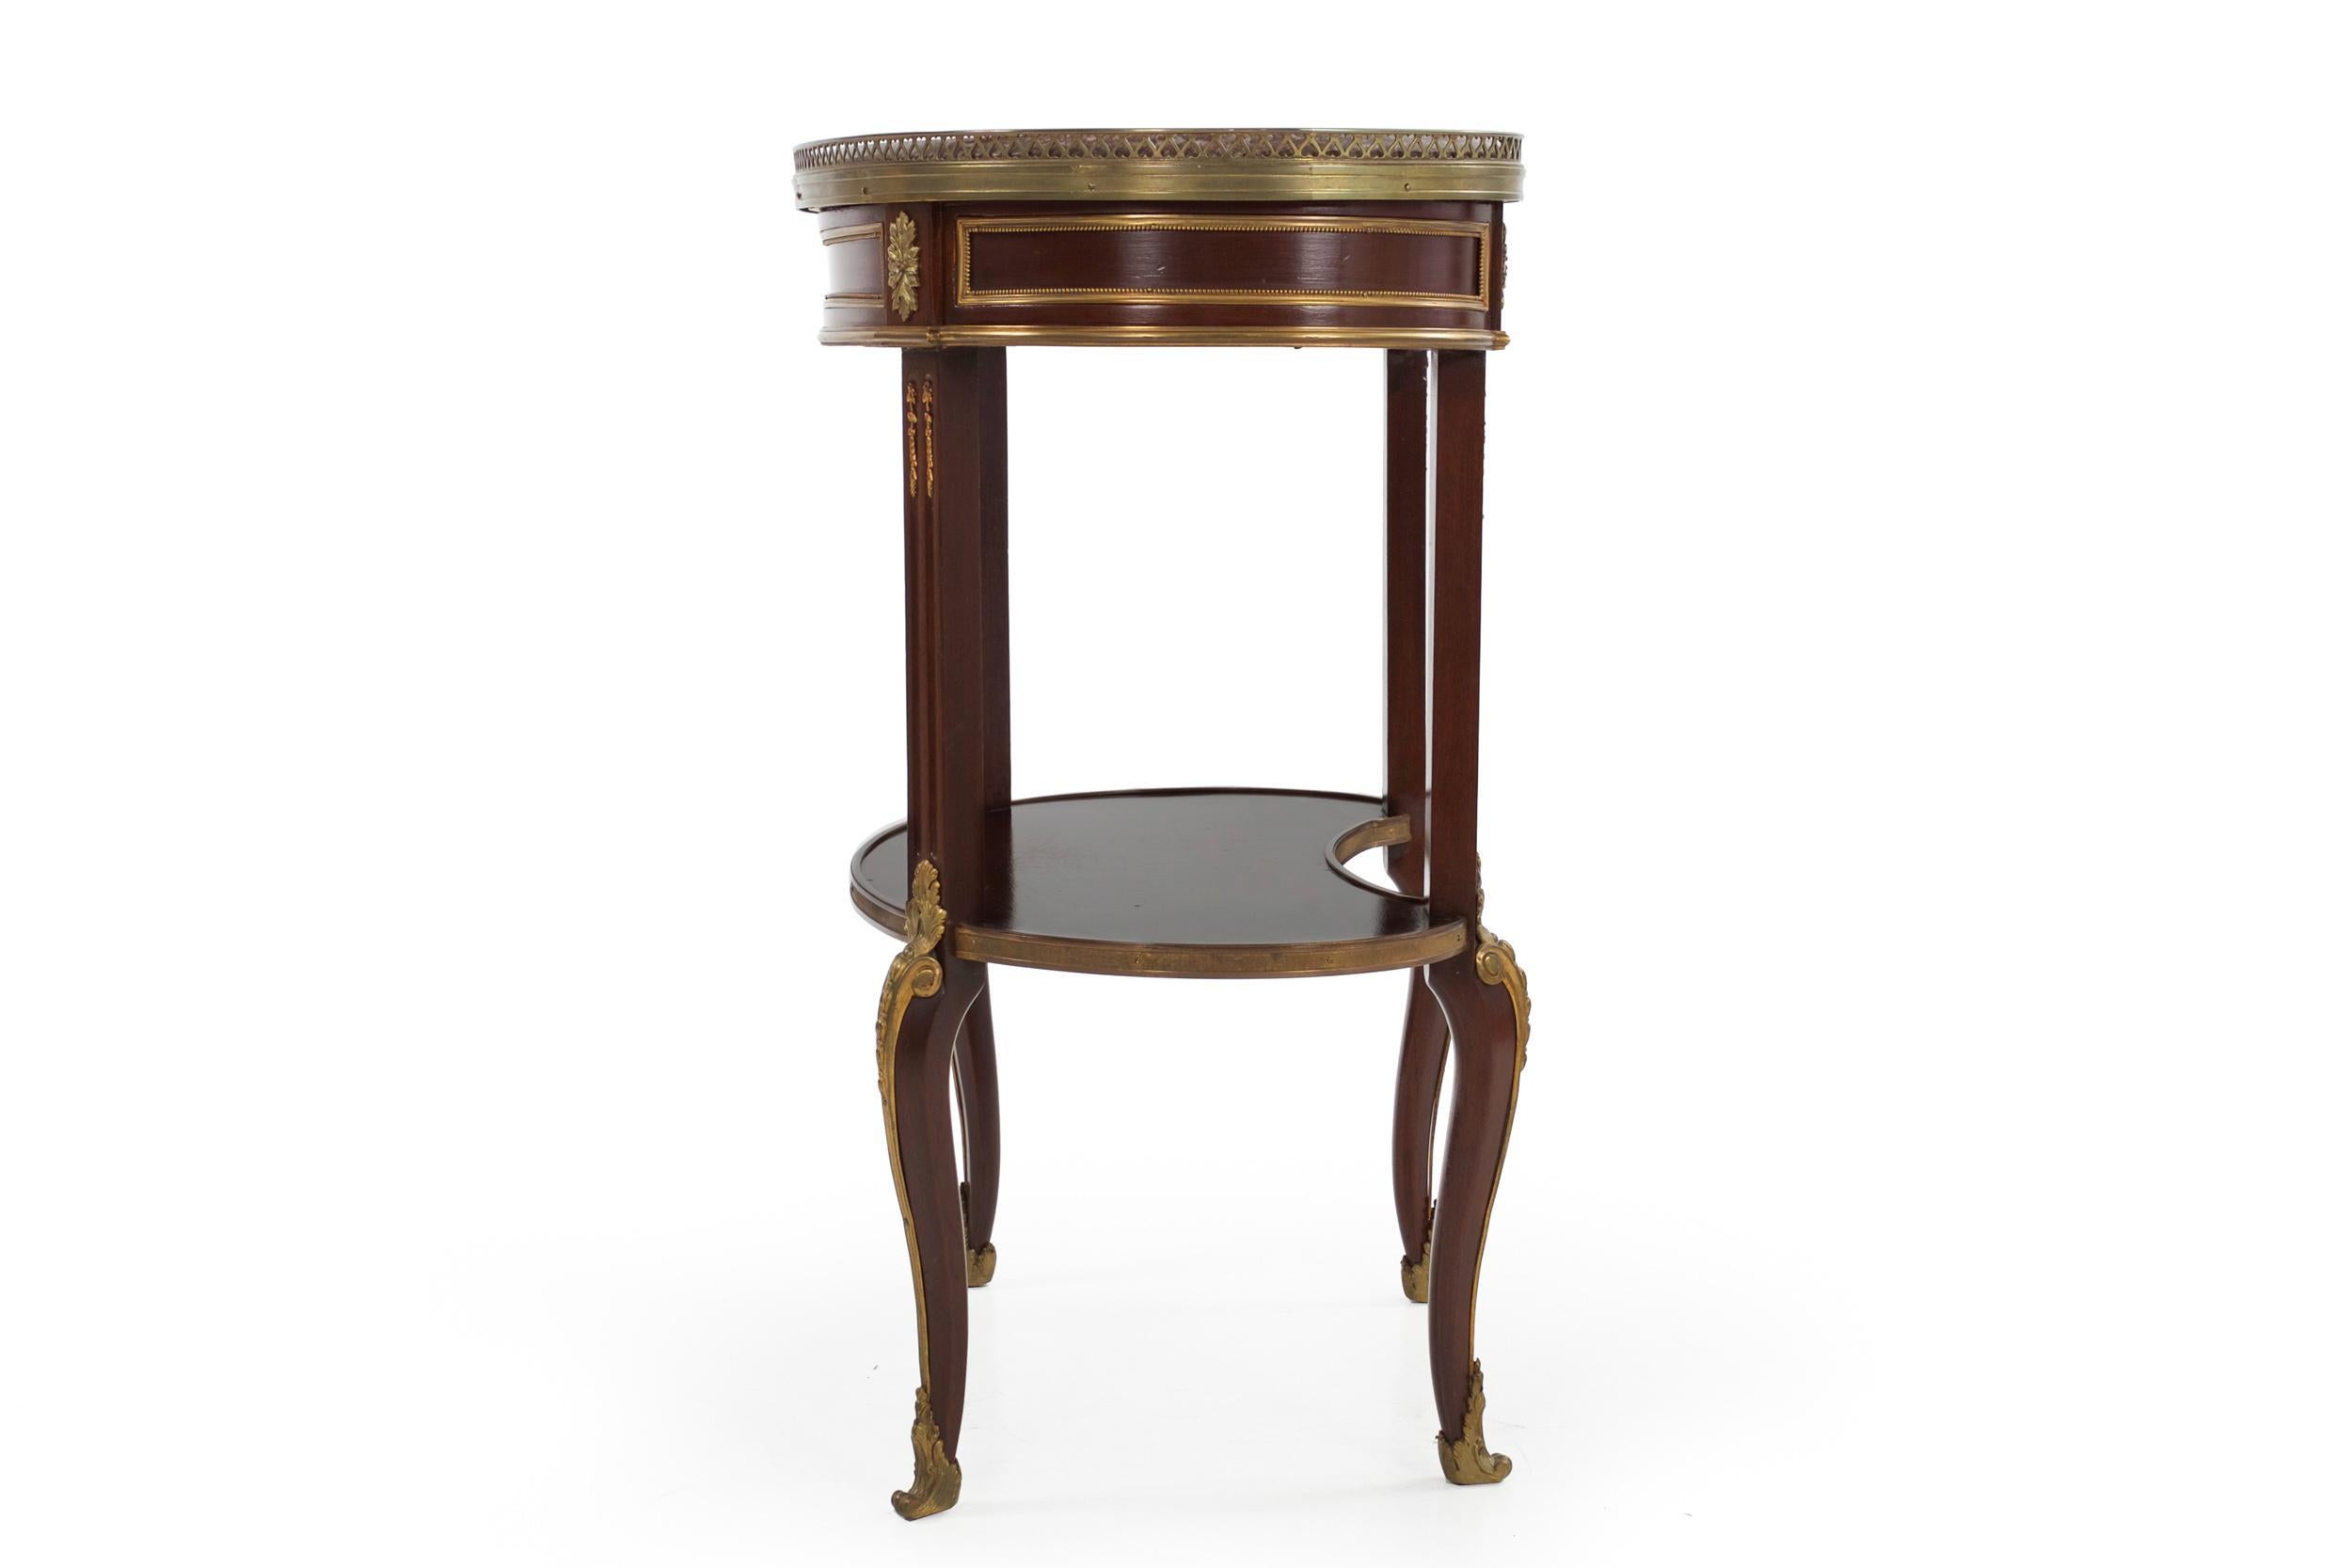 20th Century French Louis XVI Style Mahogany and Bronze Kidney-Form Accent Table